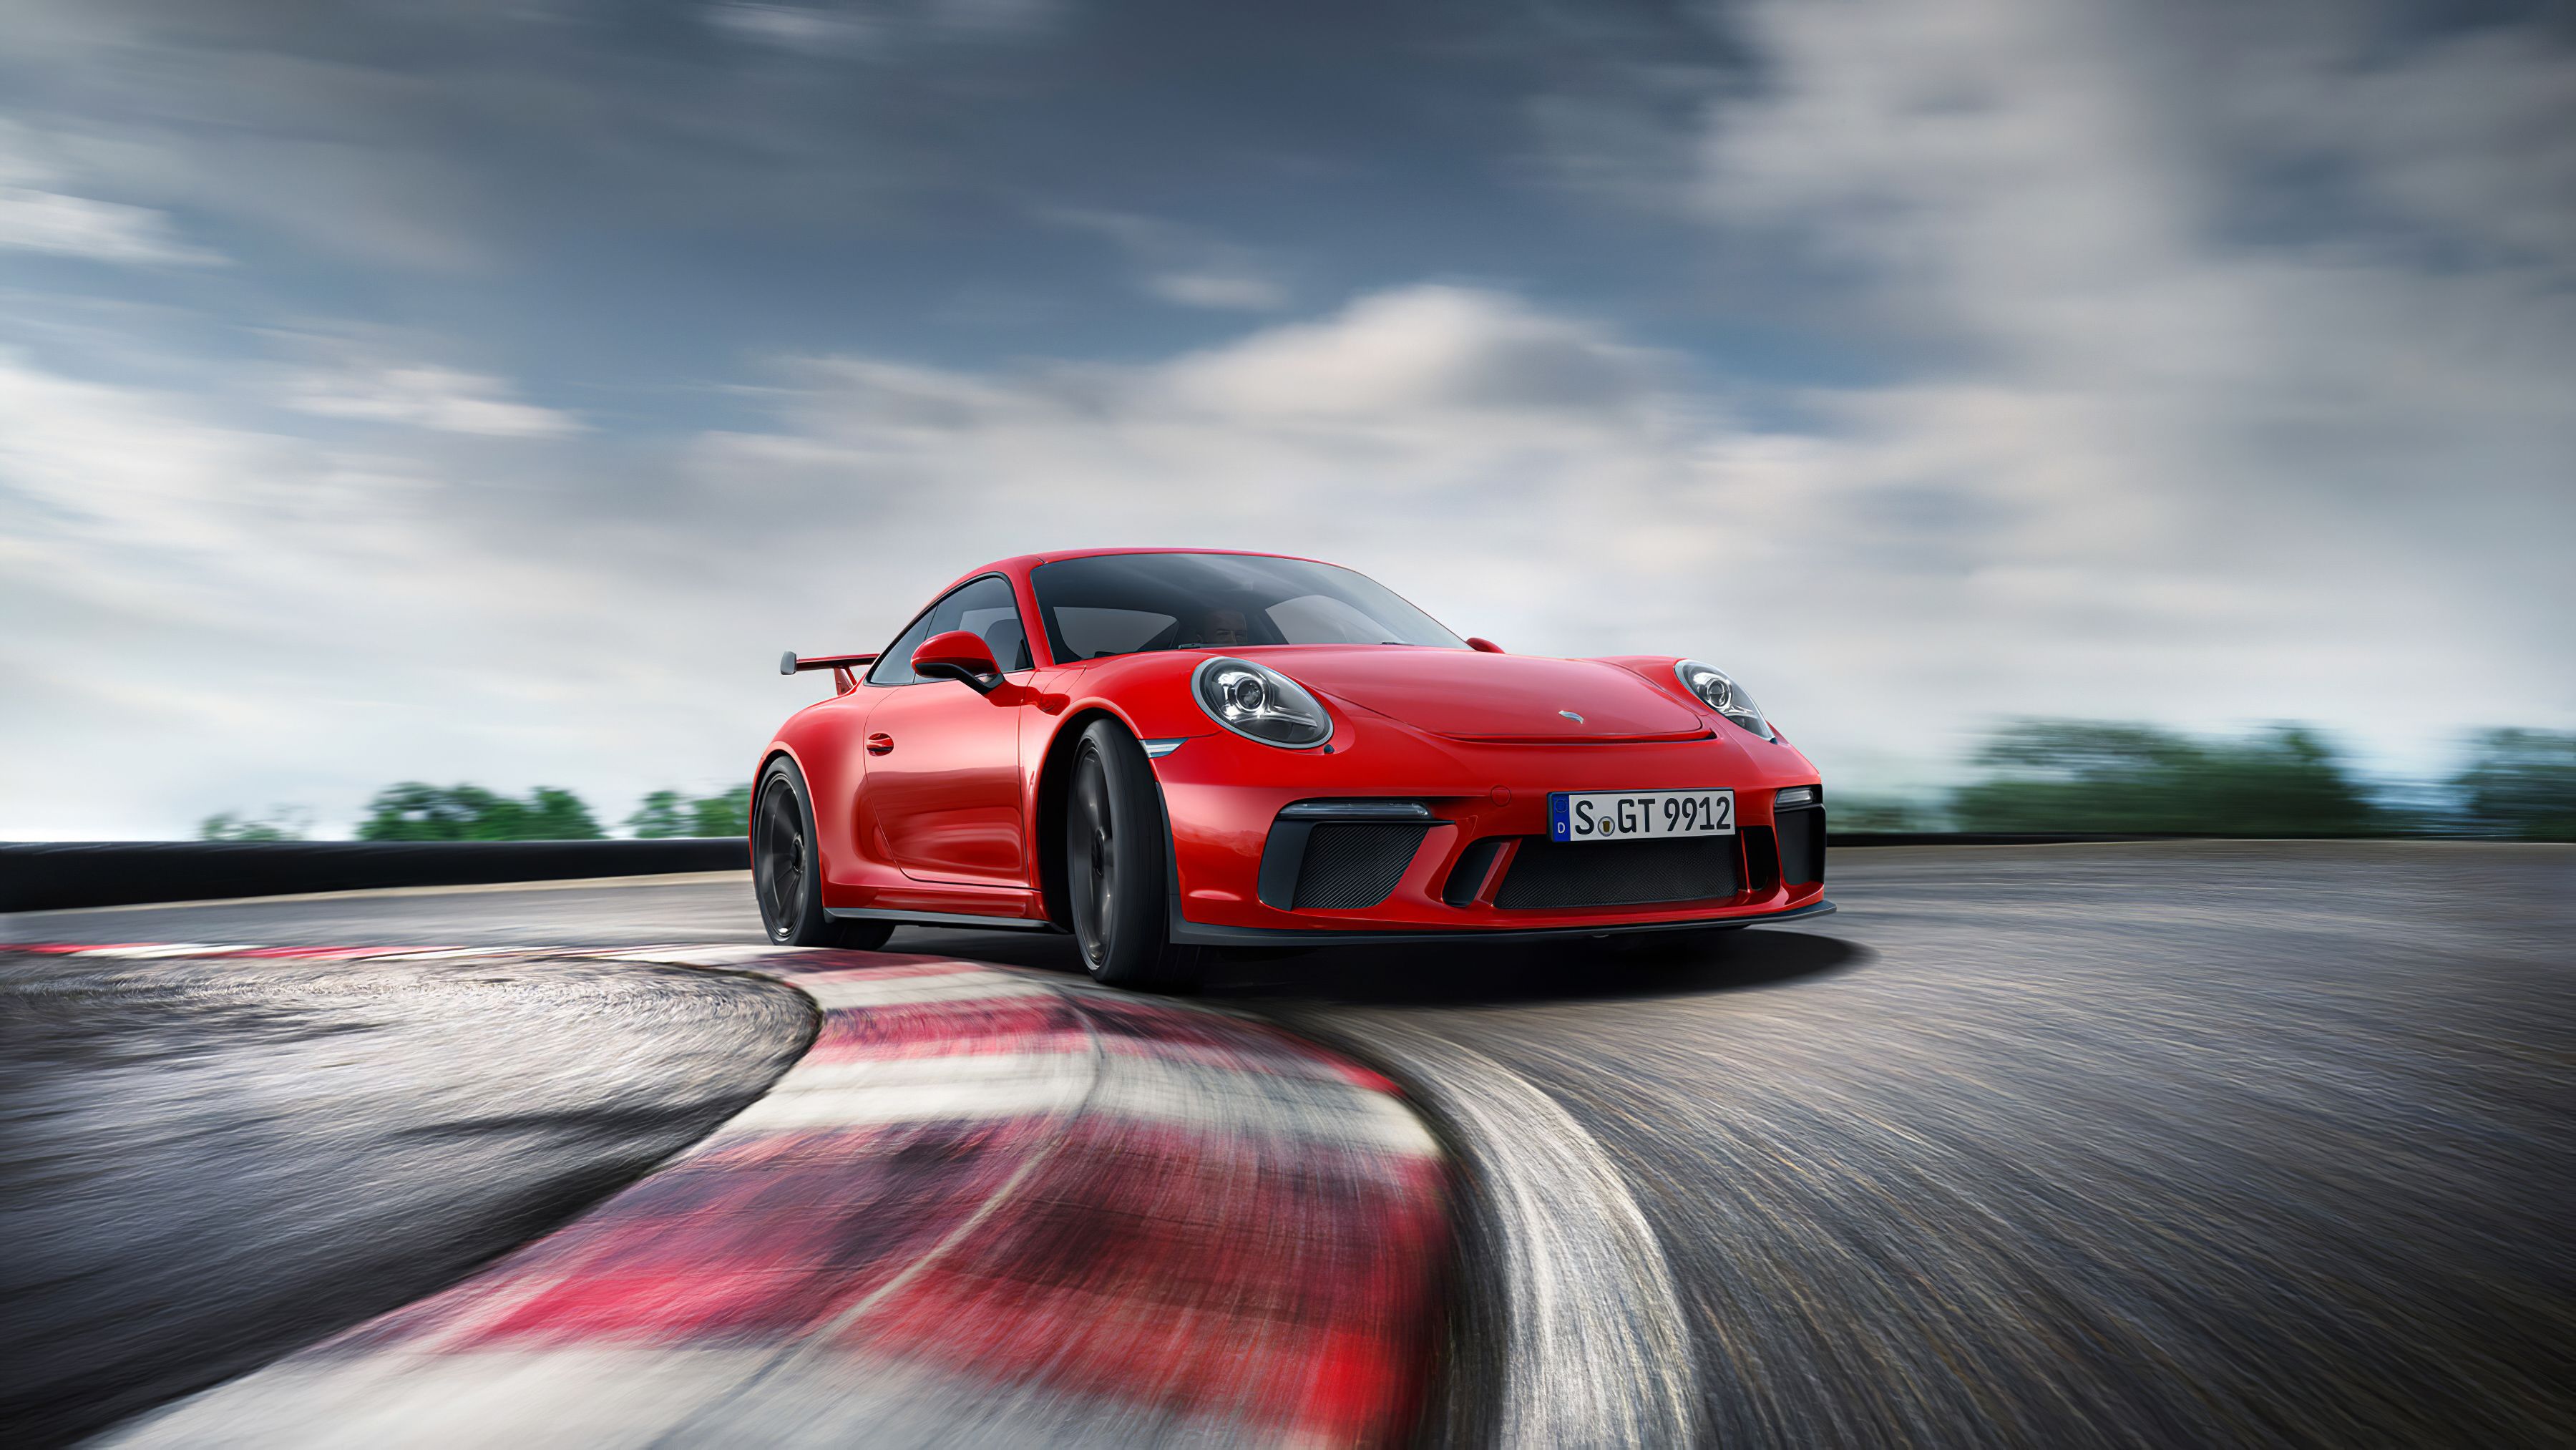 4k Red Porsche, HD Cars, 4k Wallpaper, Image, Background, Photo and Picture